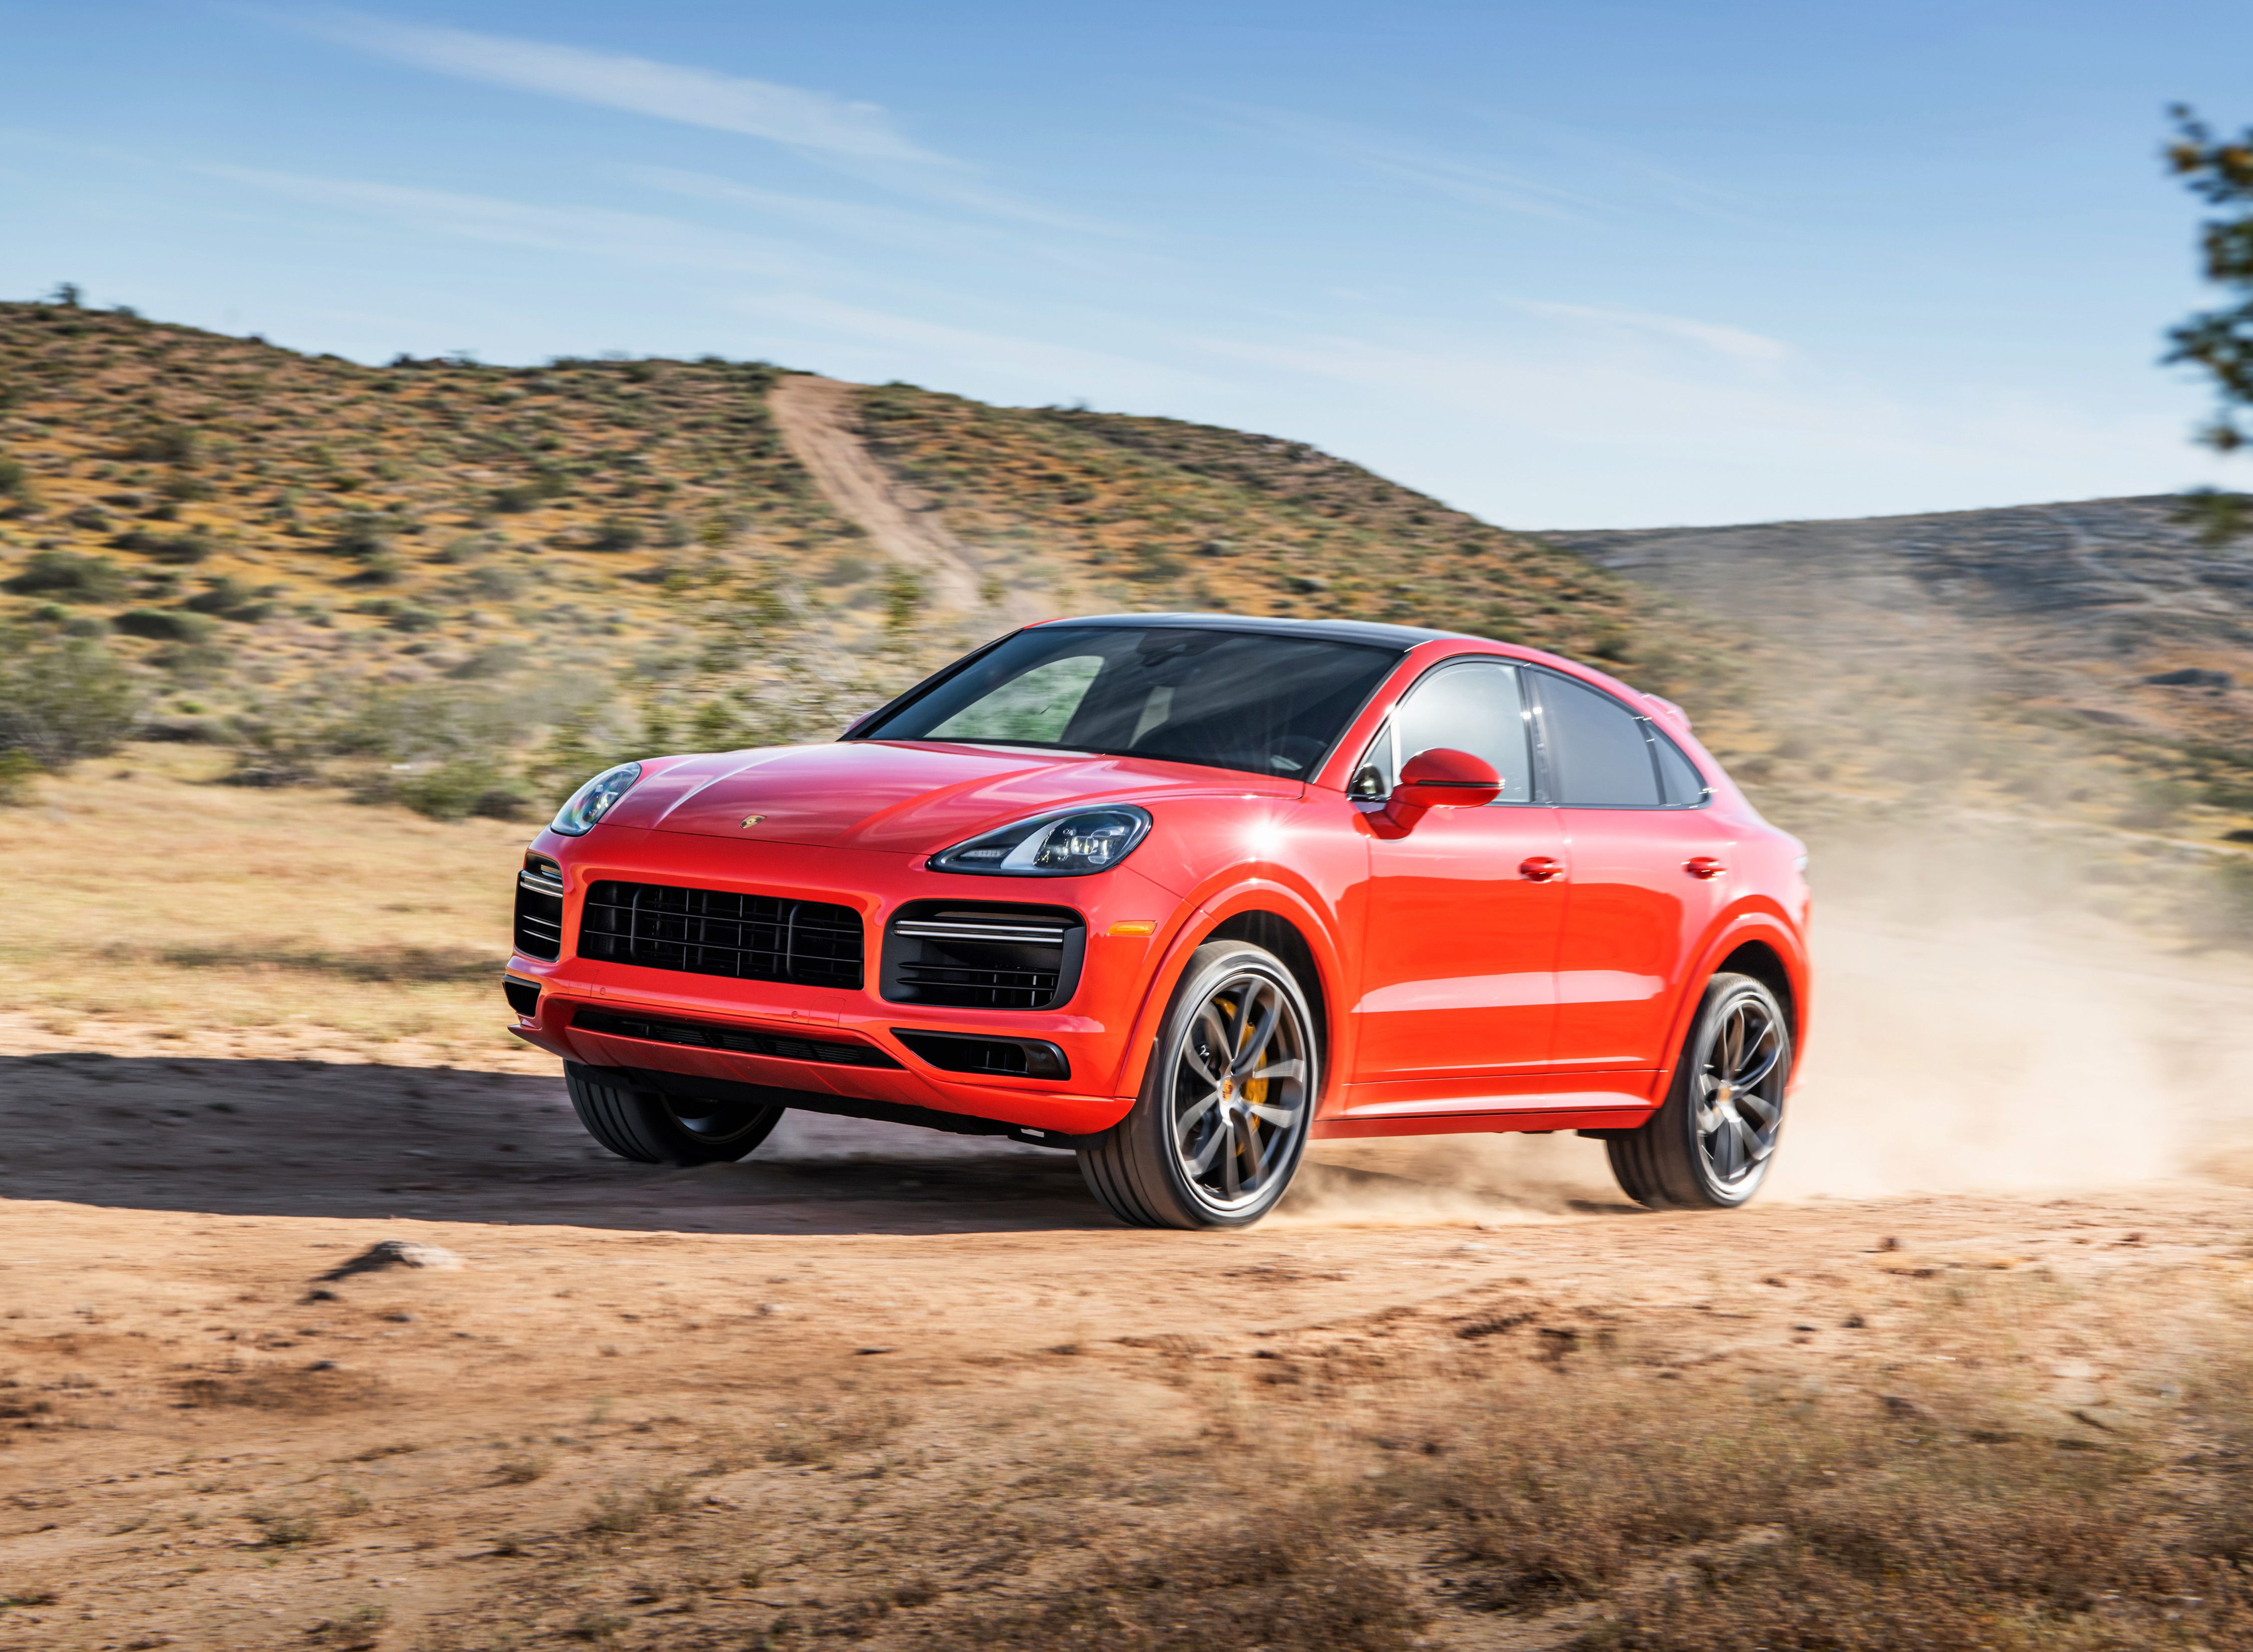 2020 Porsche Cayenne Turbo Coupe: A Fire-Breathing SUV with